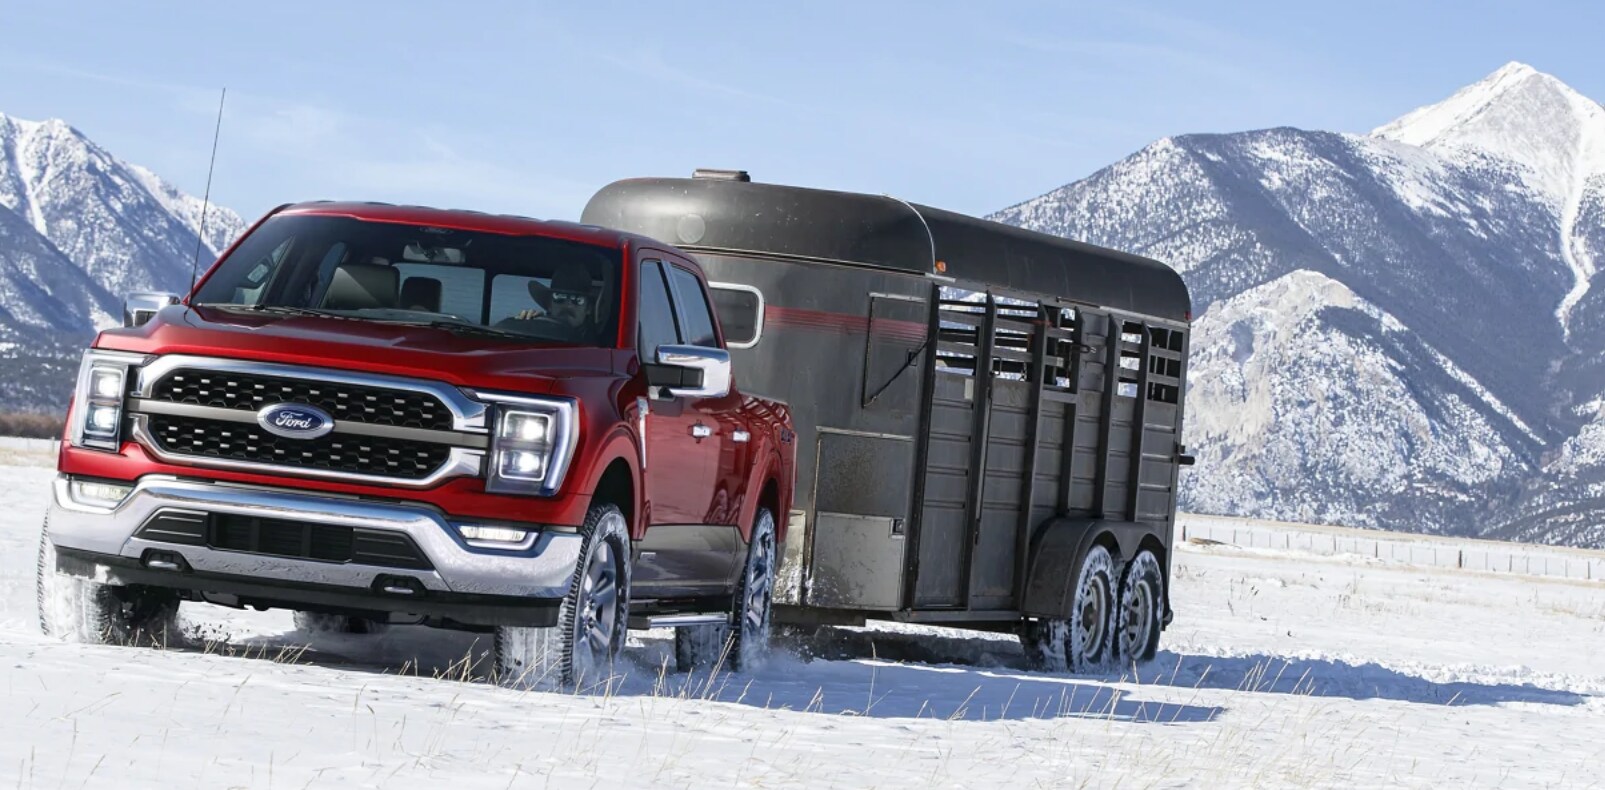 2021 Ford F-150 Towing Capacity